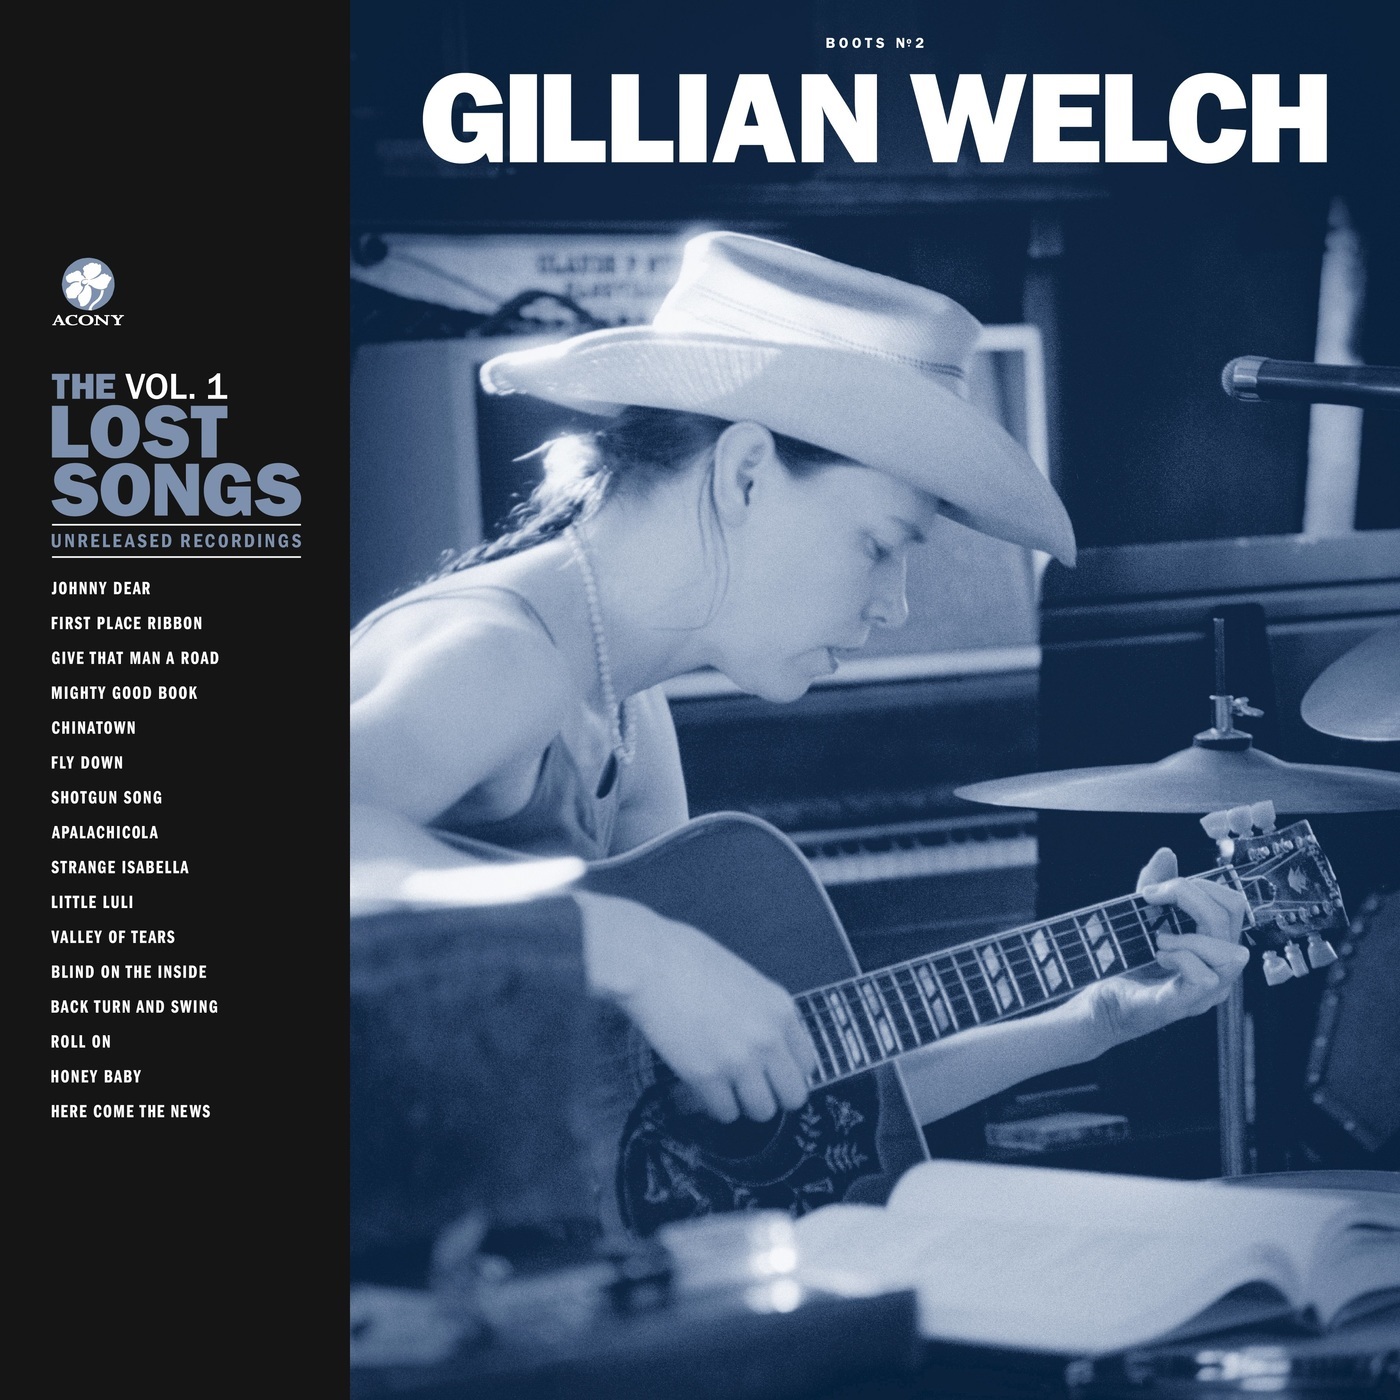 Gillian Welch – Boots No. 2: The Lost Songs Vol. 1 (2020) [FLAC 24bit/44,1kHz]